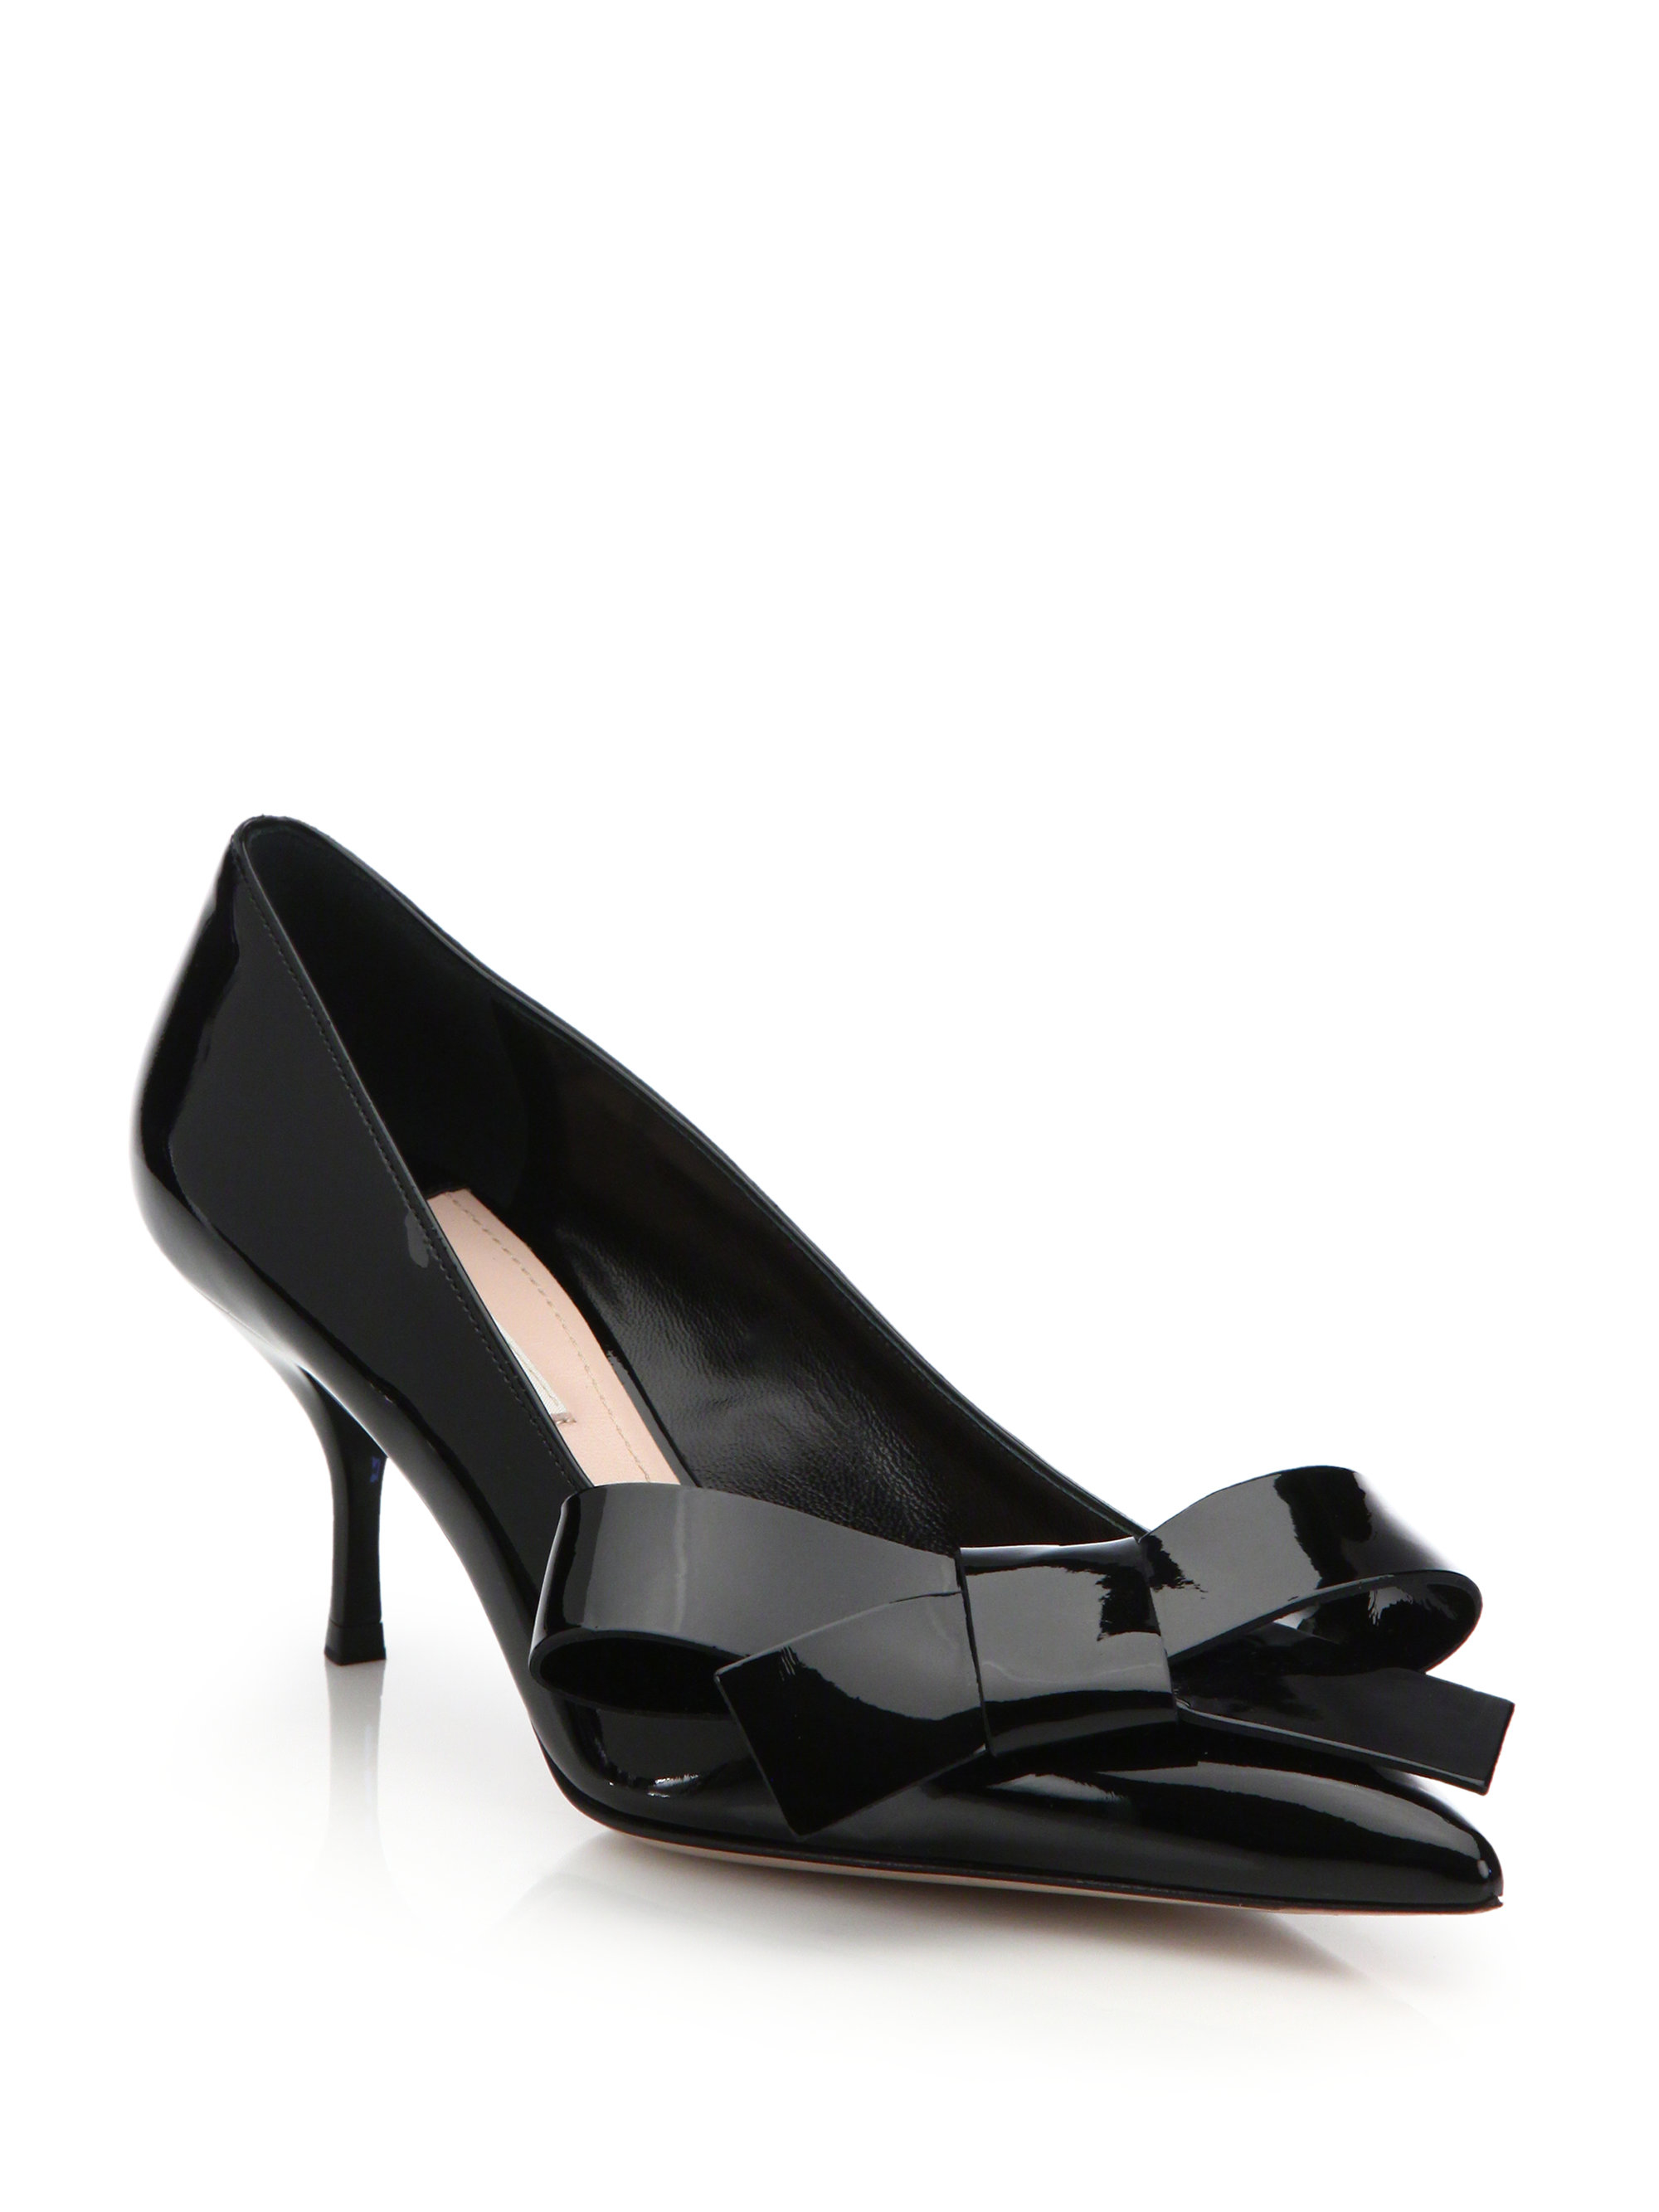 black patent leather shoes with bow